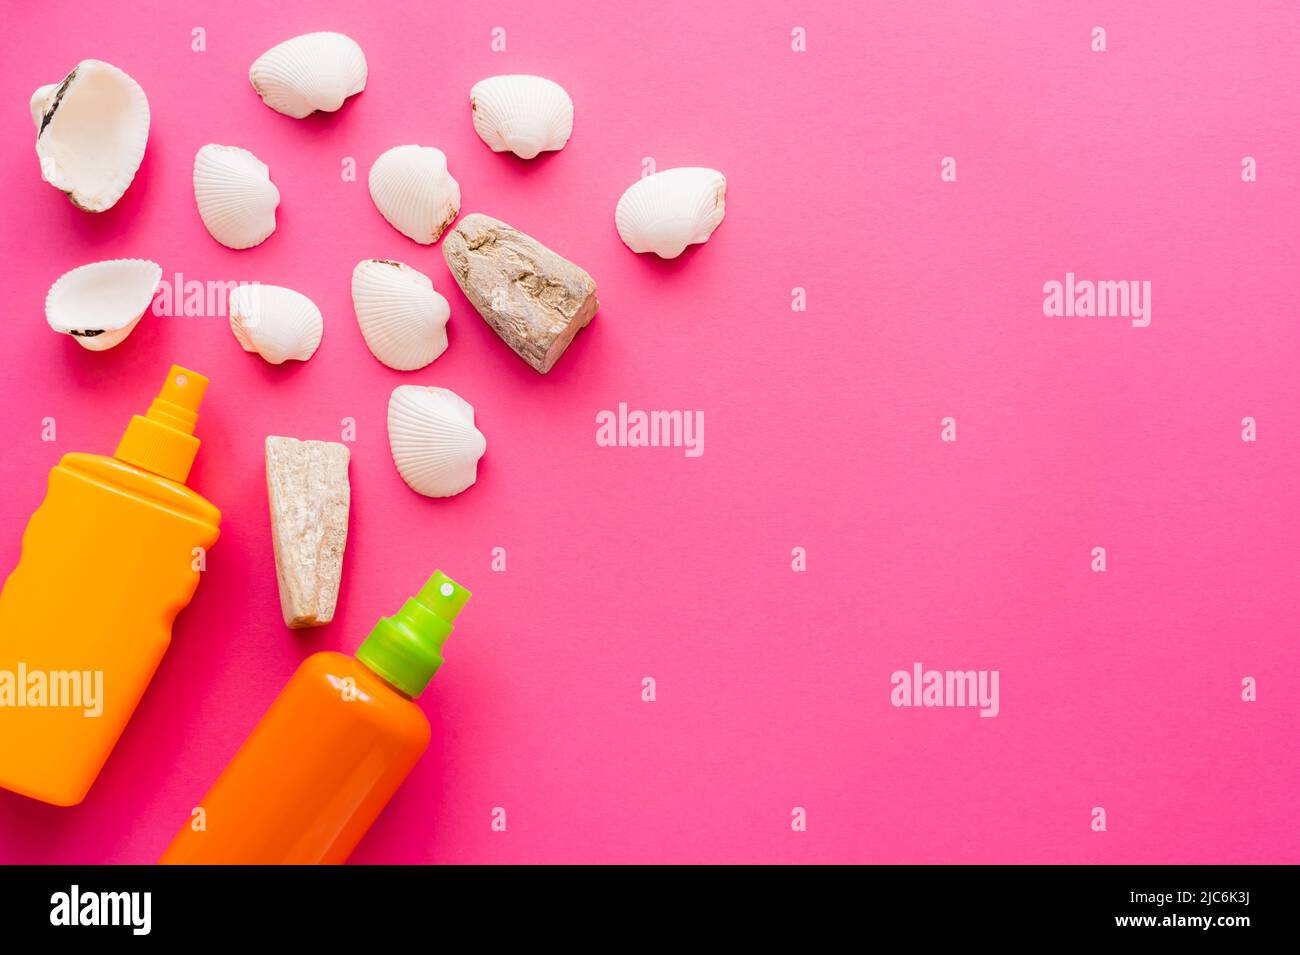 Top view of seashells and sunscreens on pink background Stock Photo